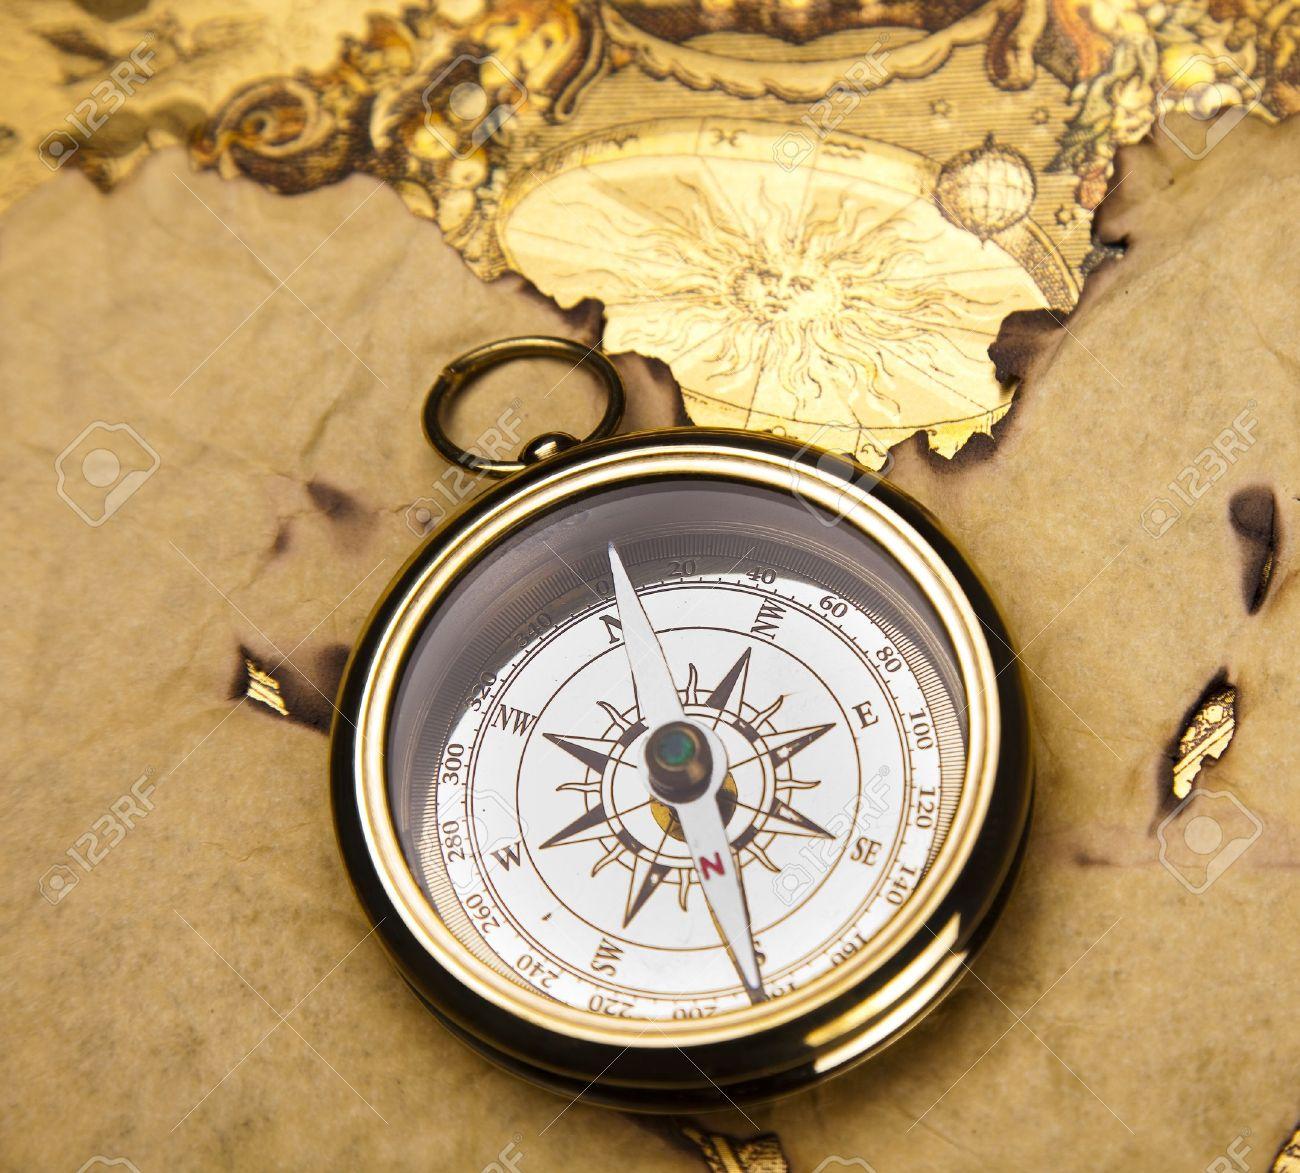 13503130-old-style-compass-and-paper-background